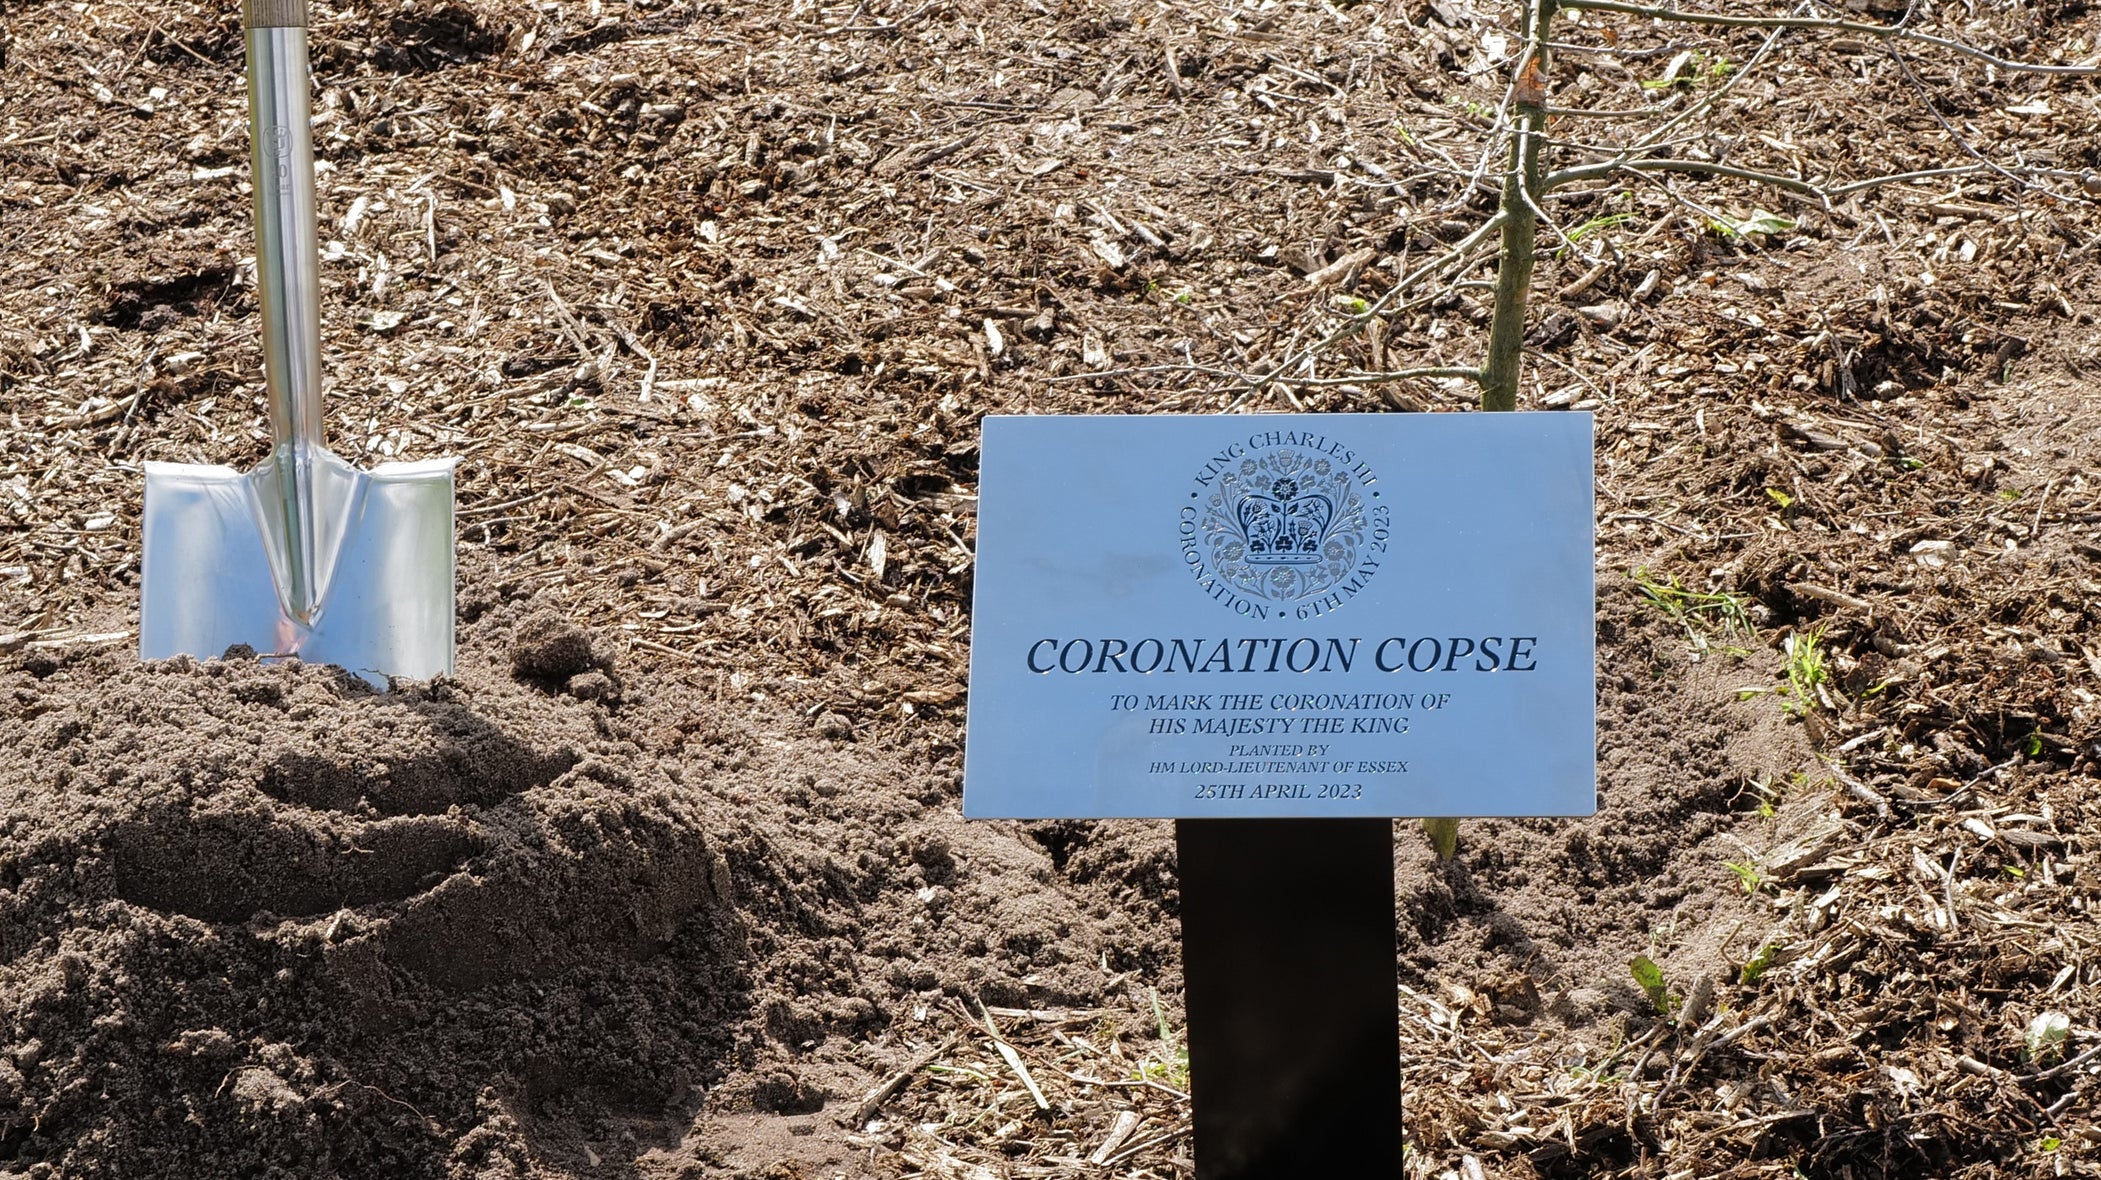 Coronation Copse – final tree of 800 planted. Founder of Wilkin & Sons commemorated by The Lord Lieutenant.